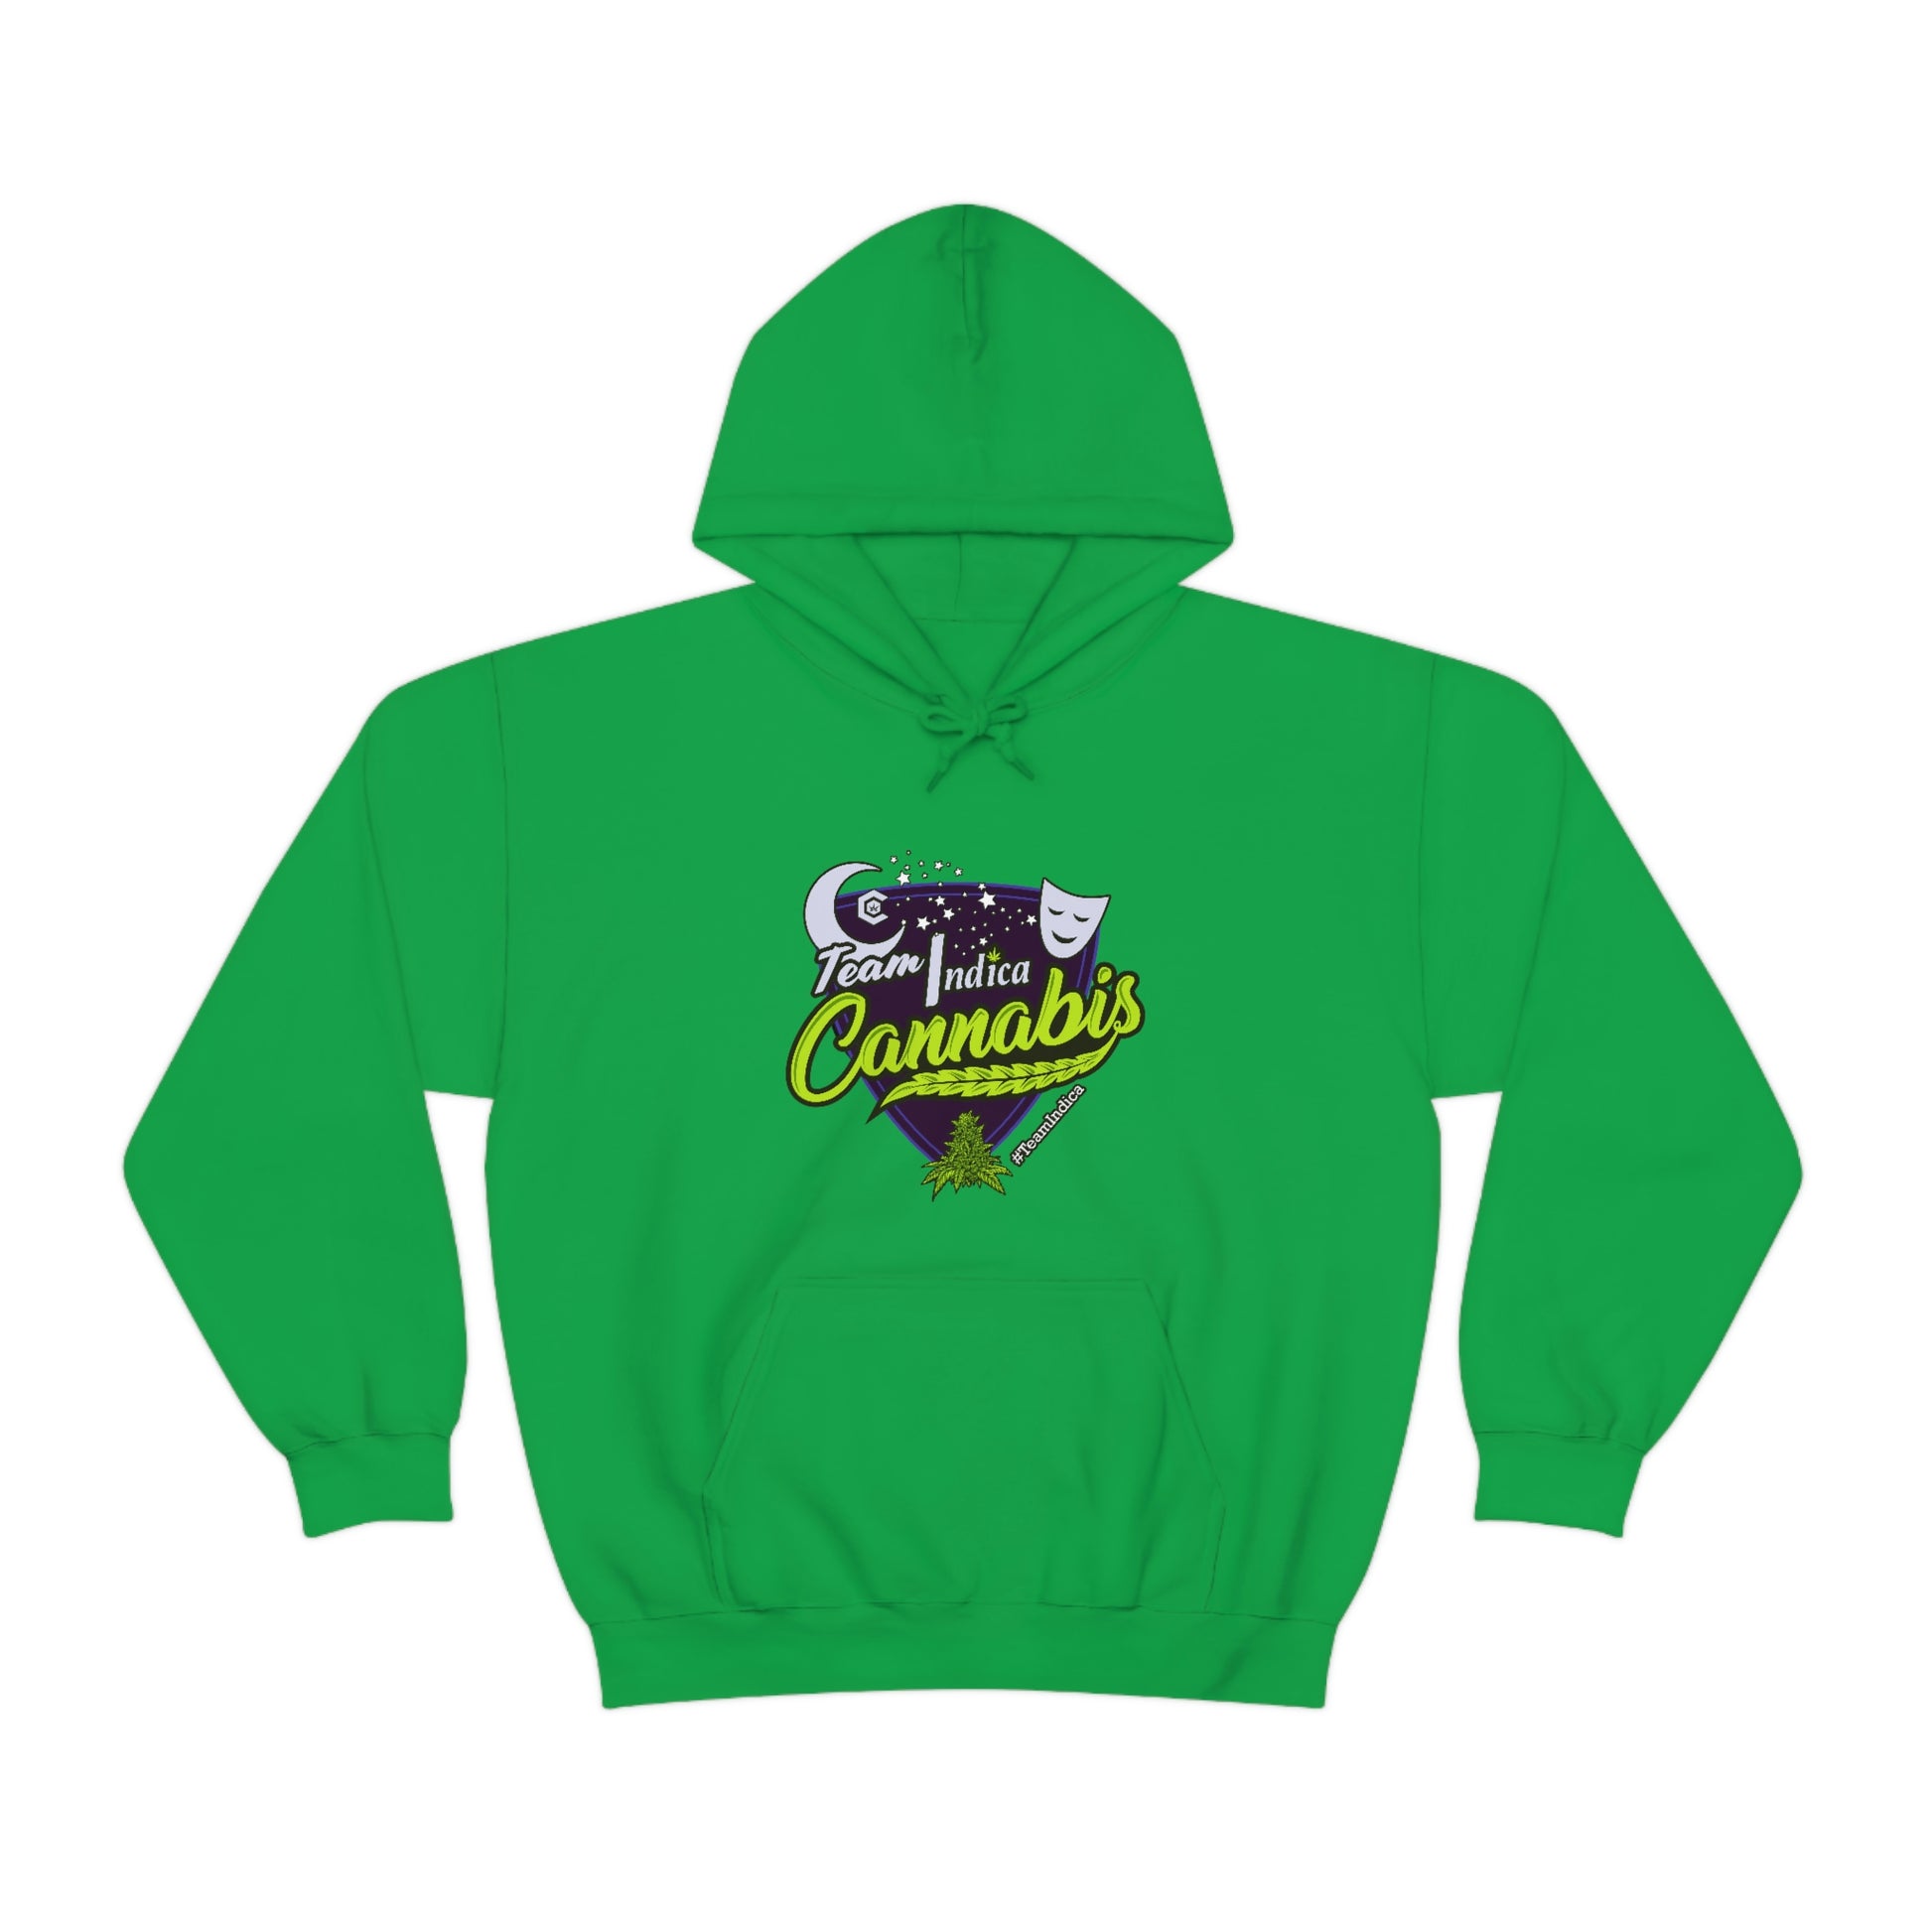 a Team Indica Cannabis Pullover with a purple and green logo on it.